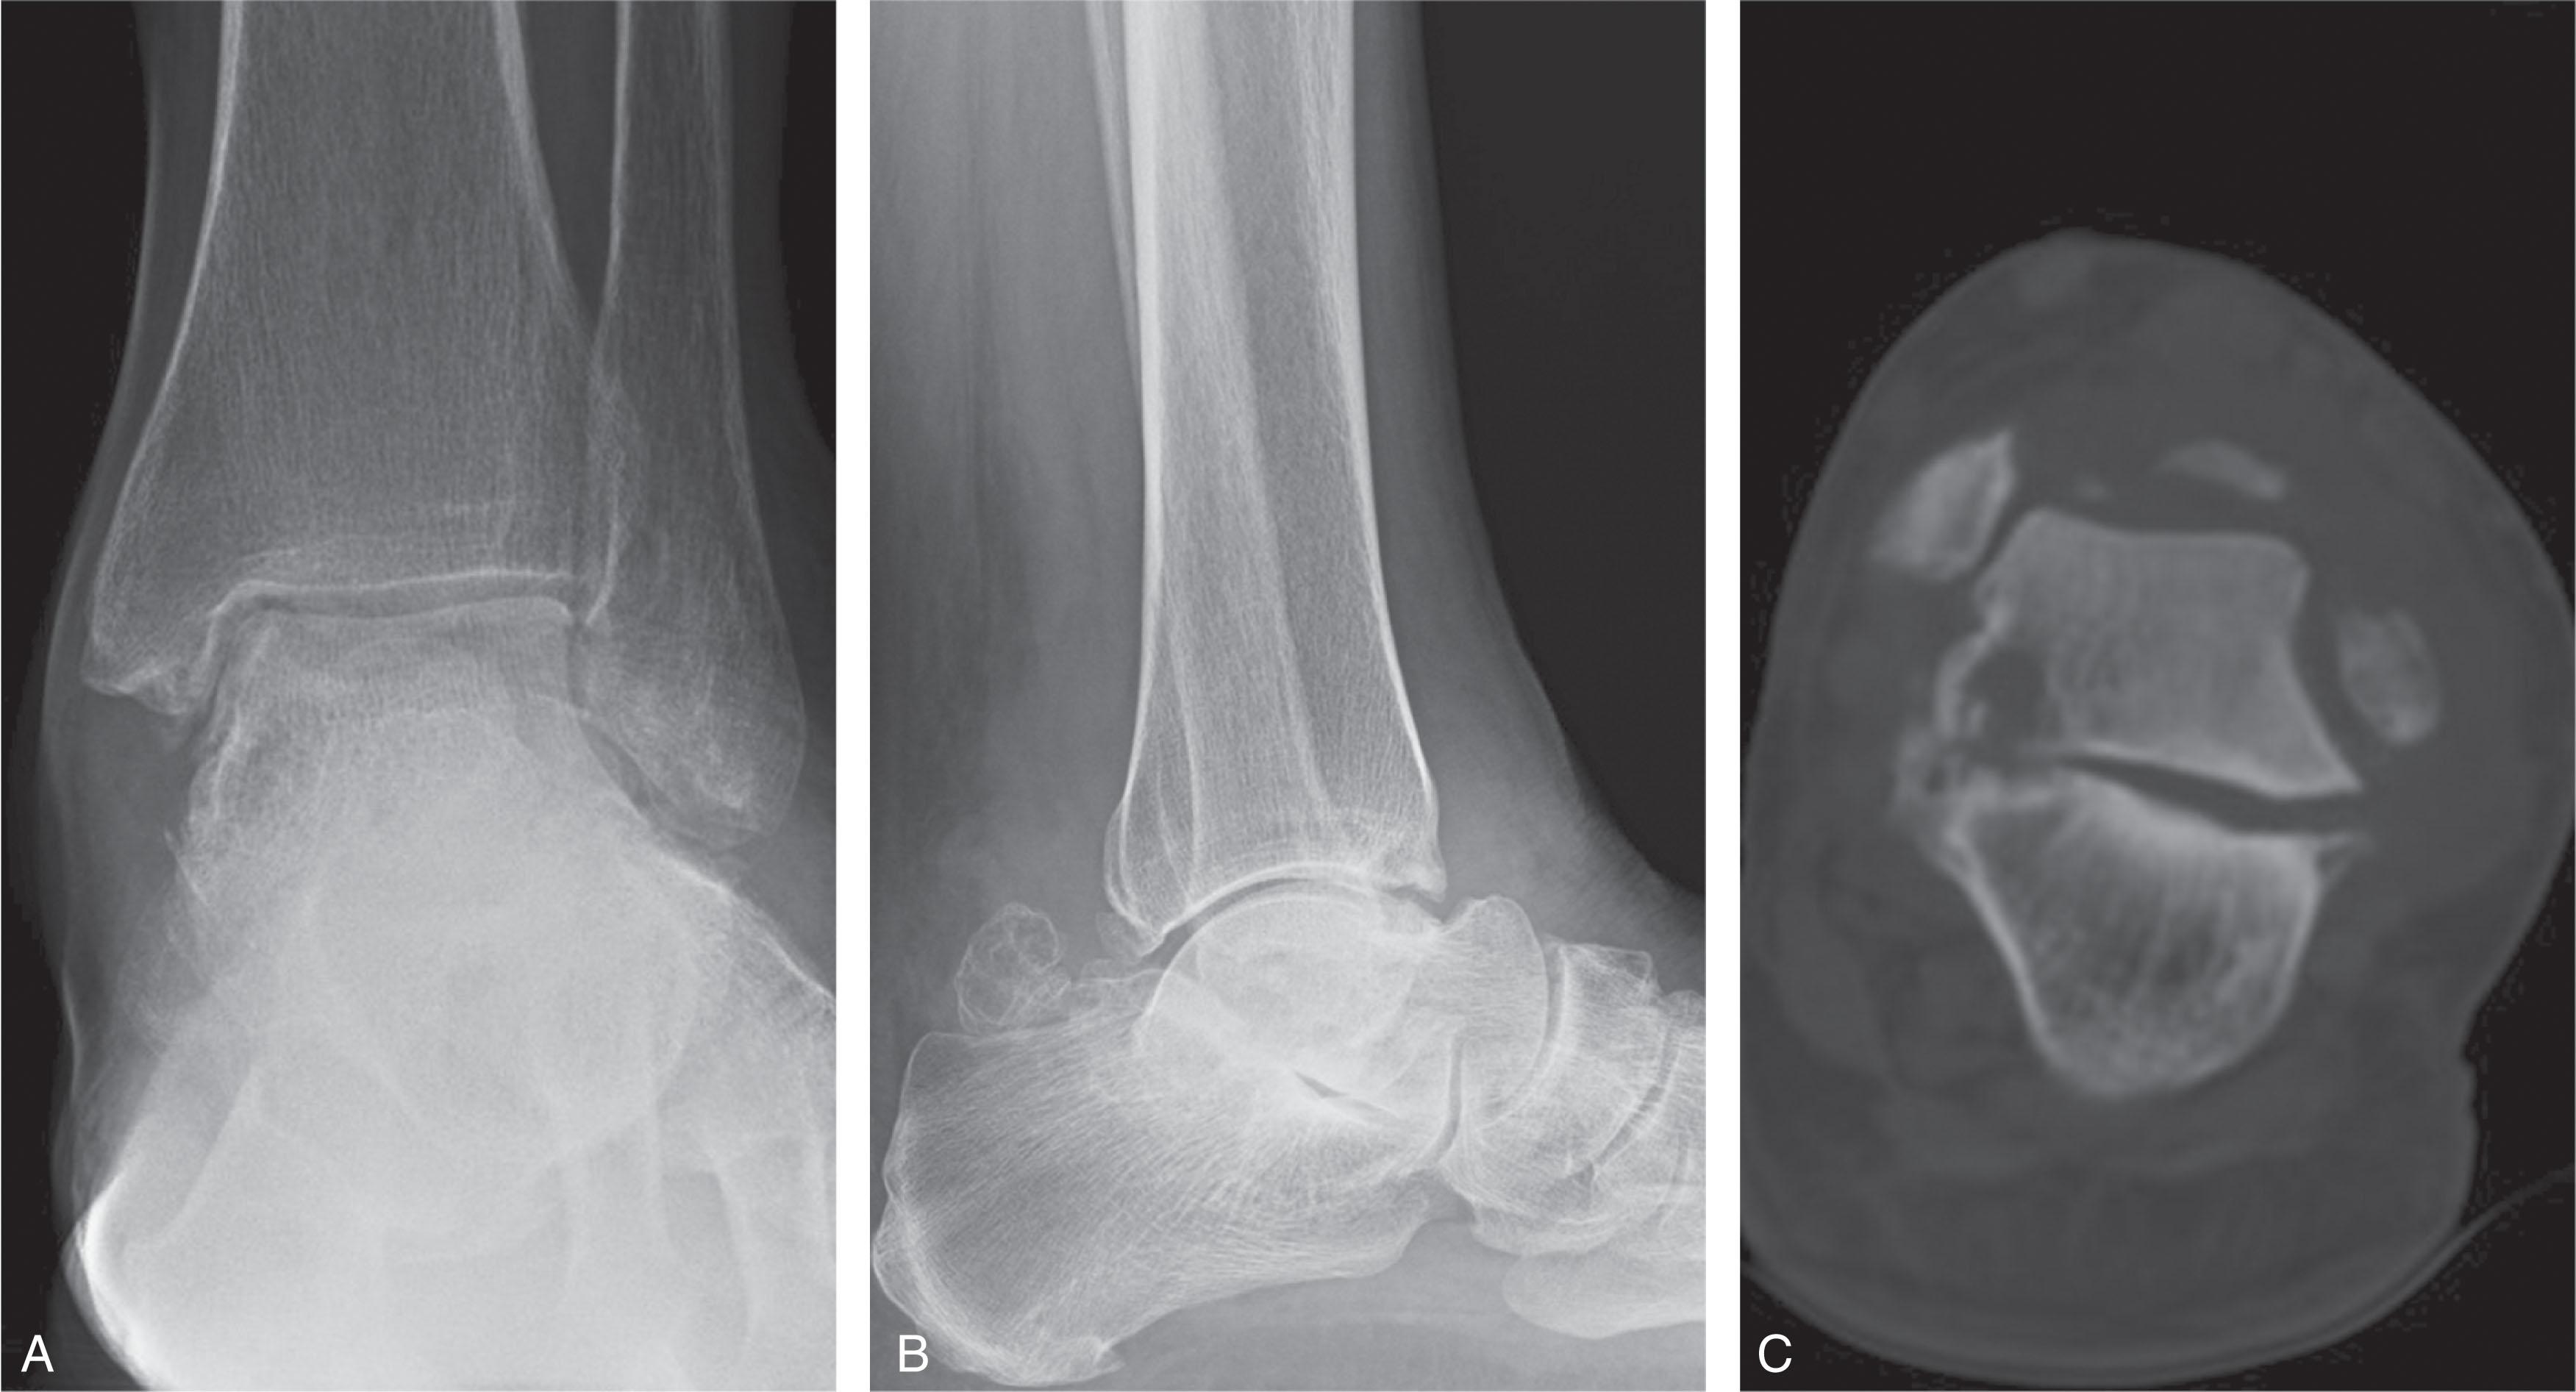 Fig. 25-4, Subtalar arthritis associated with a hindfoot coalition. A and B , Anteroposterior and lateral radiographs showing subtalar coalition of the middle facet leading to subtalar joint arthritis. C , Coronal CT scan through the middle facet showing the coalition.